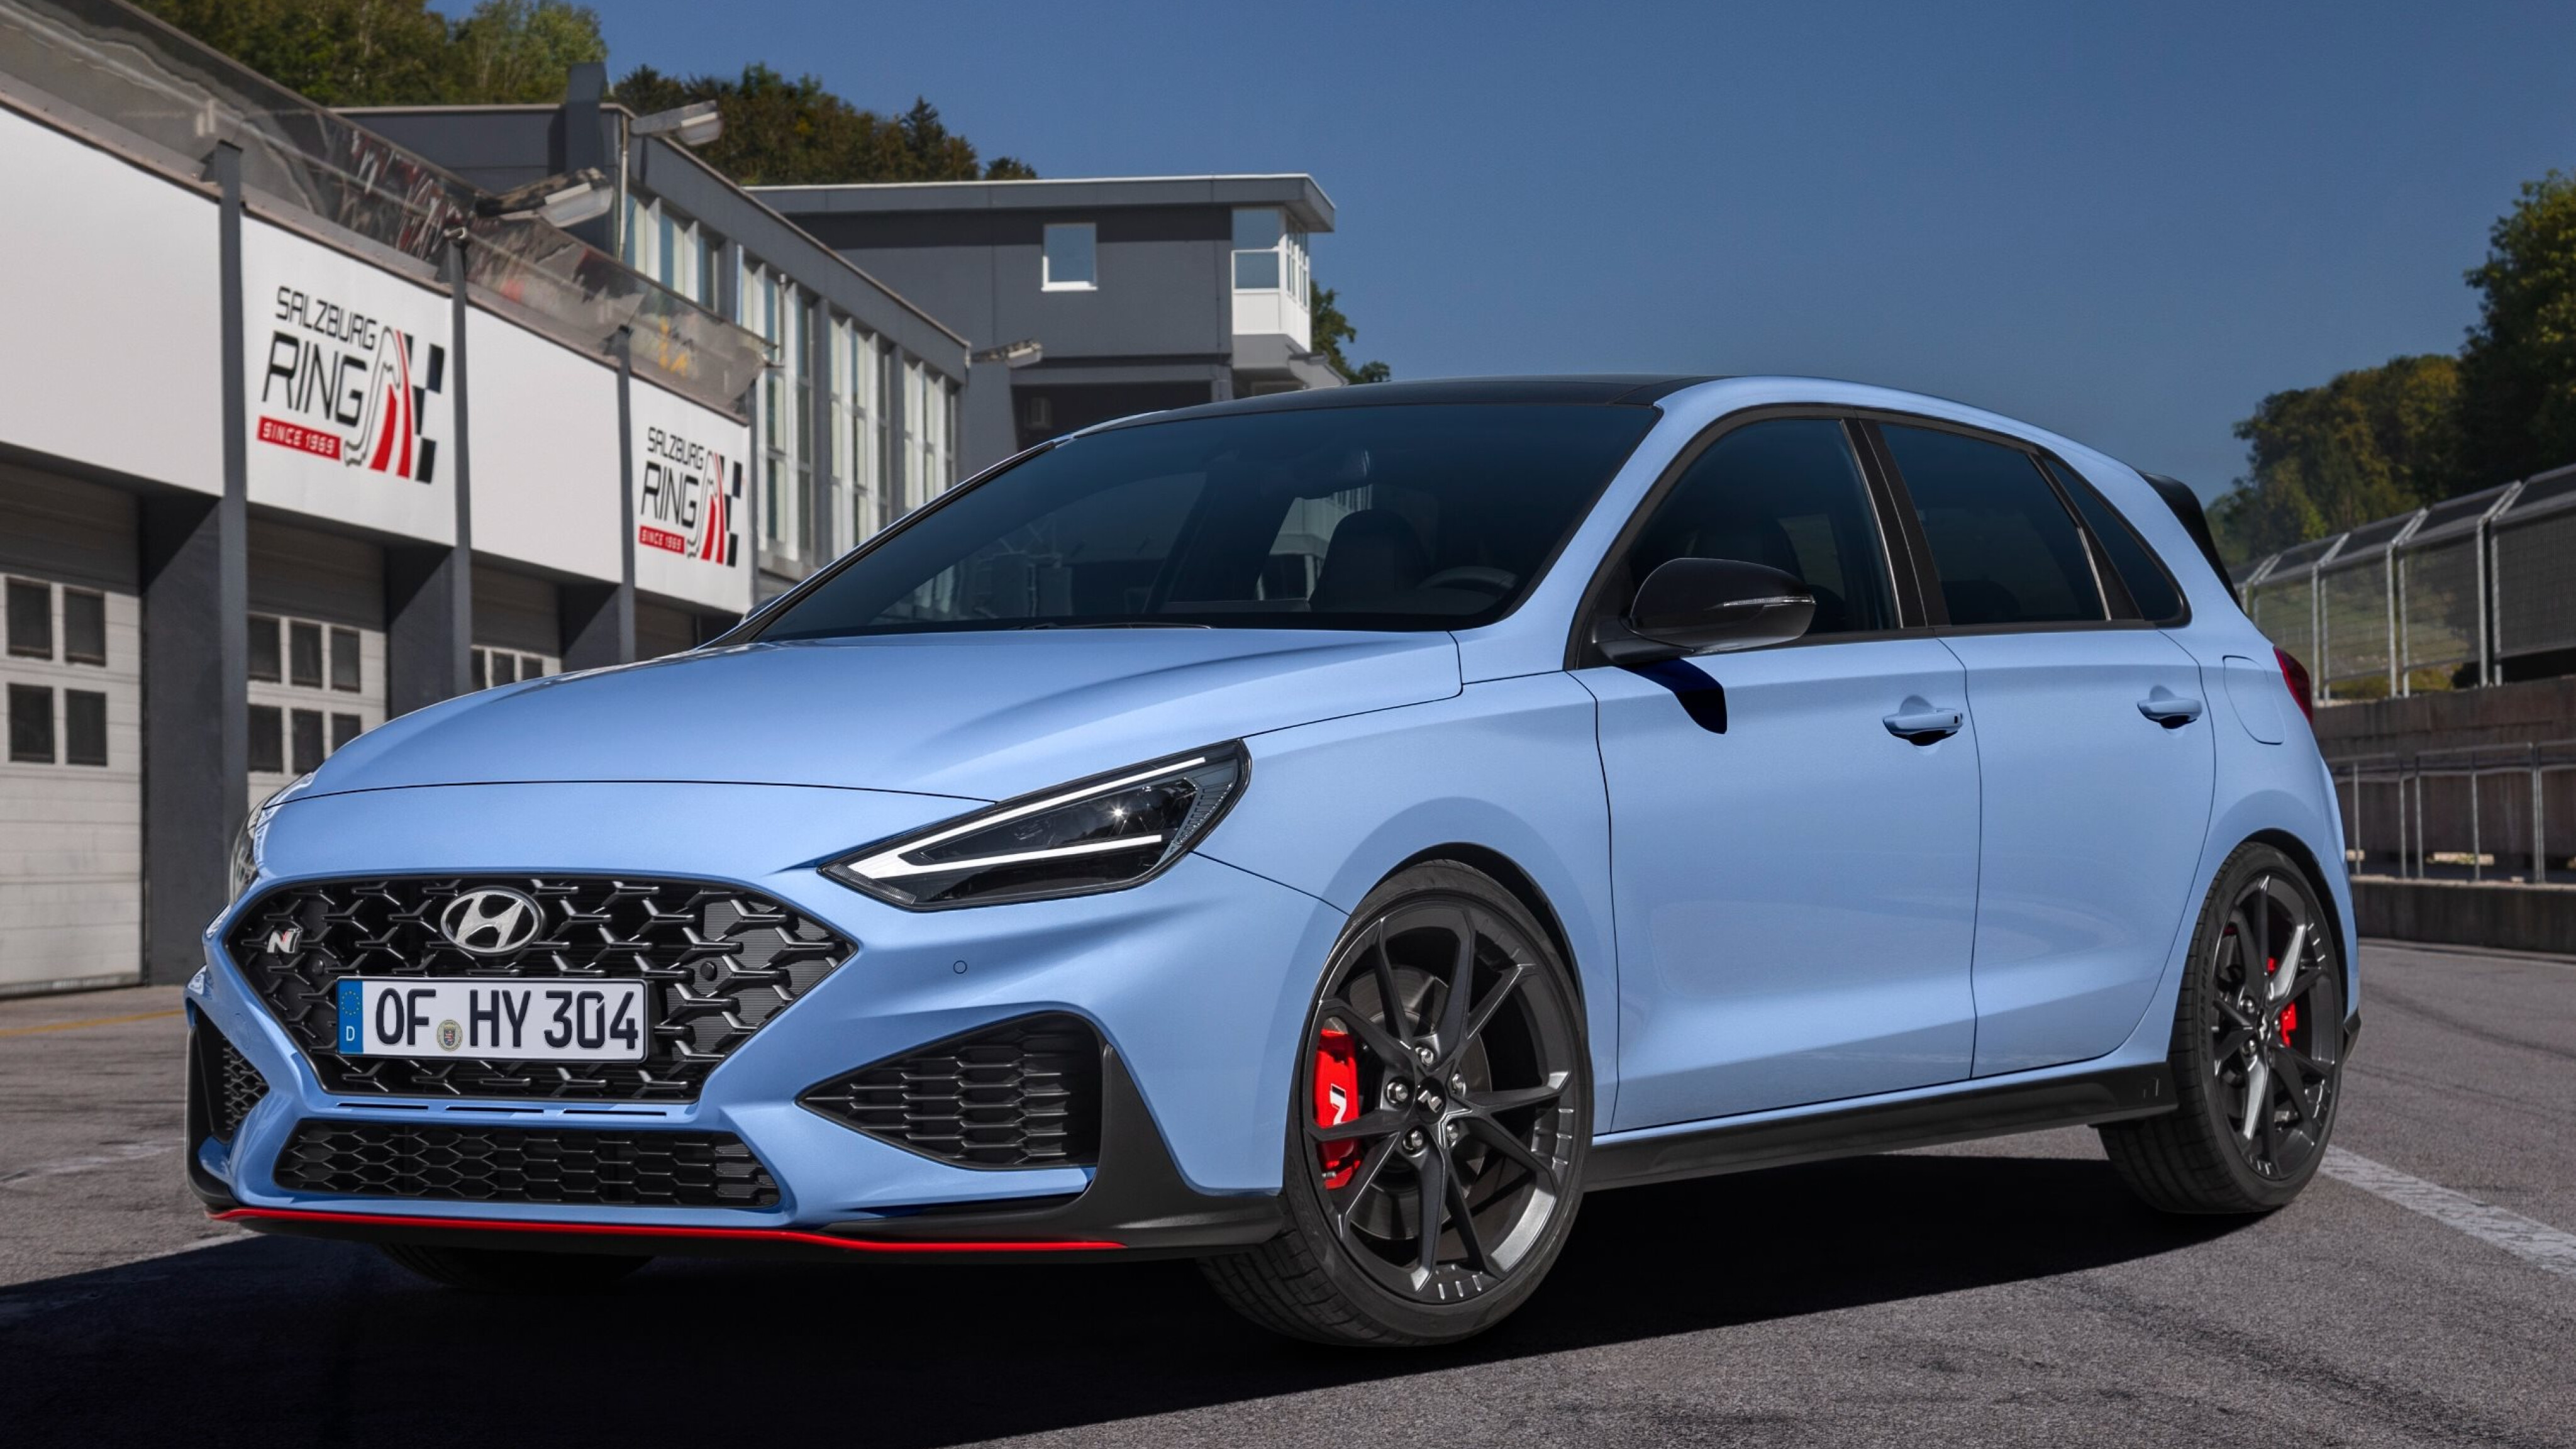 Hyundai i30 N Line Looks Like A Hot Hatch, But It's Not